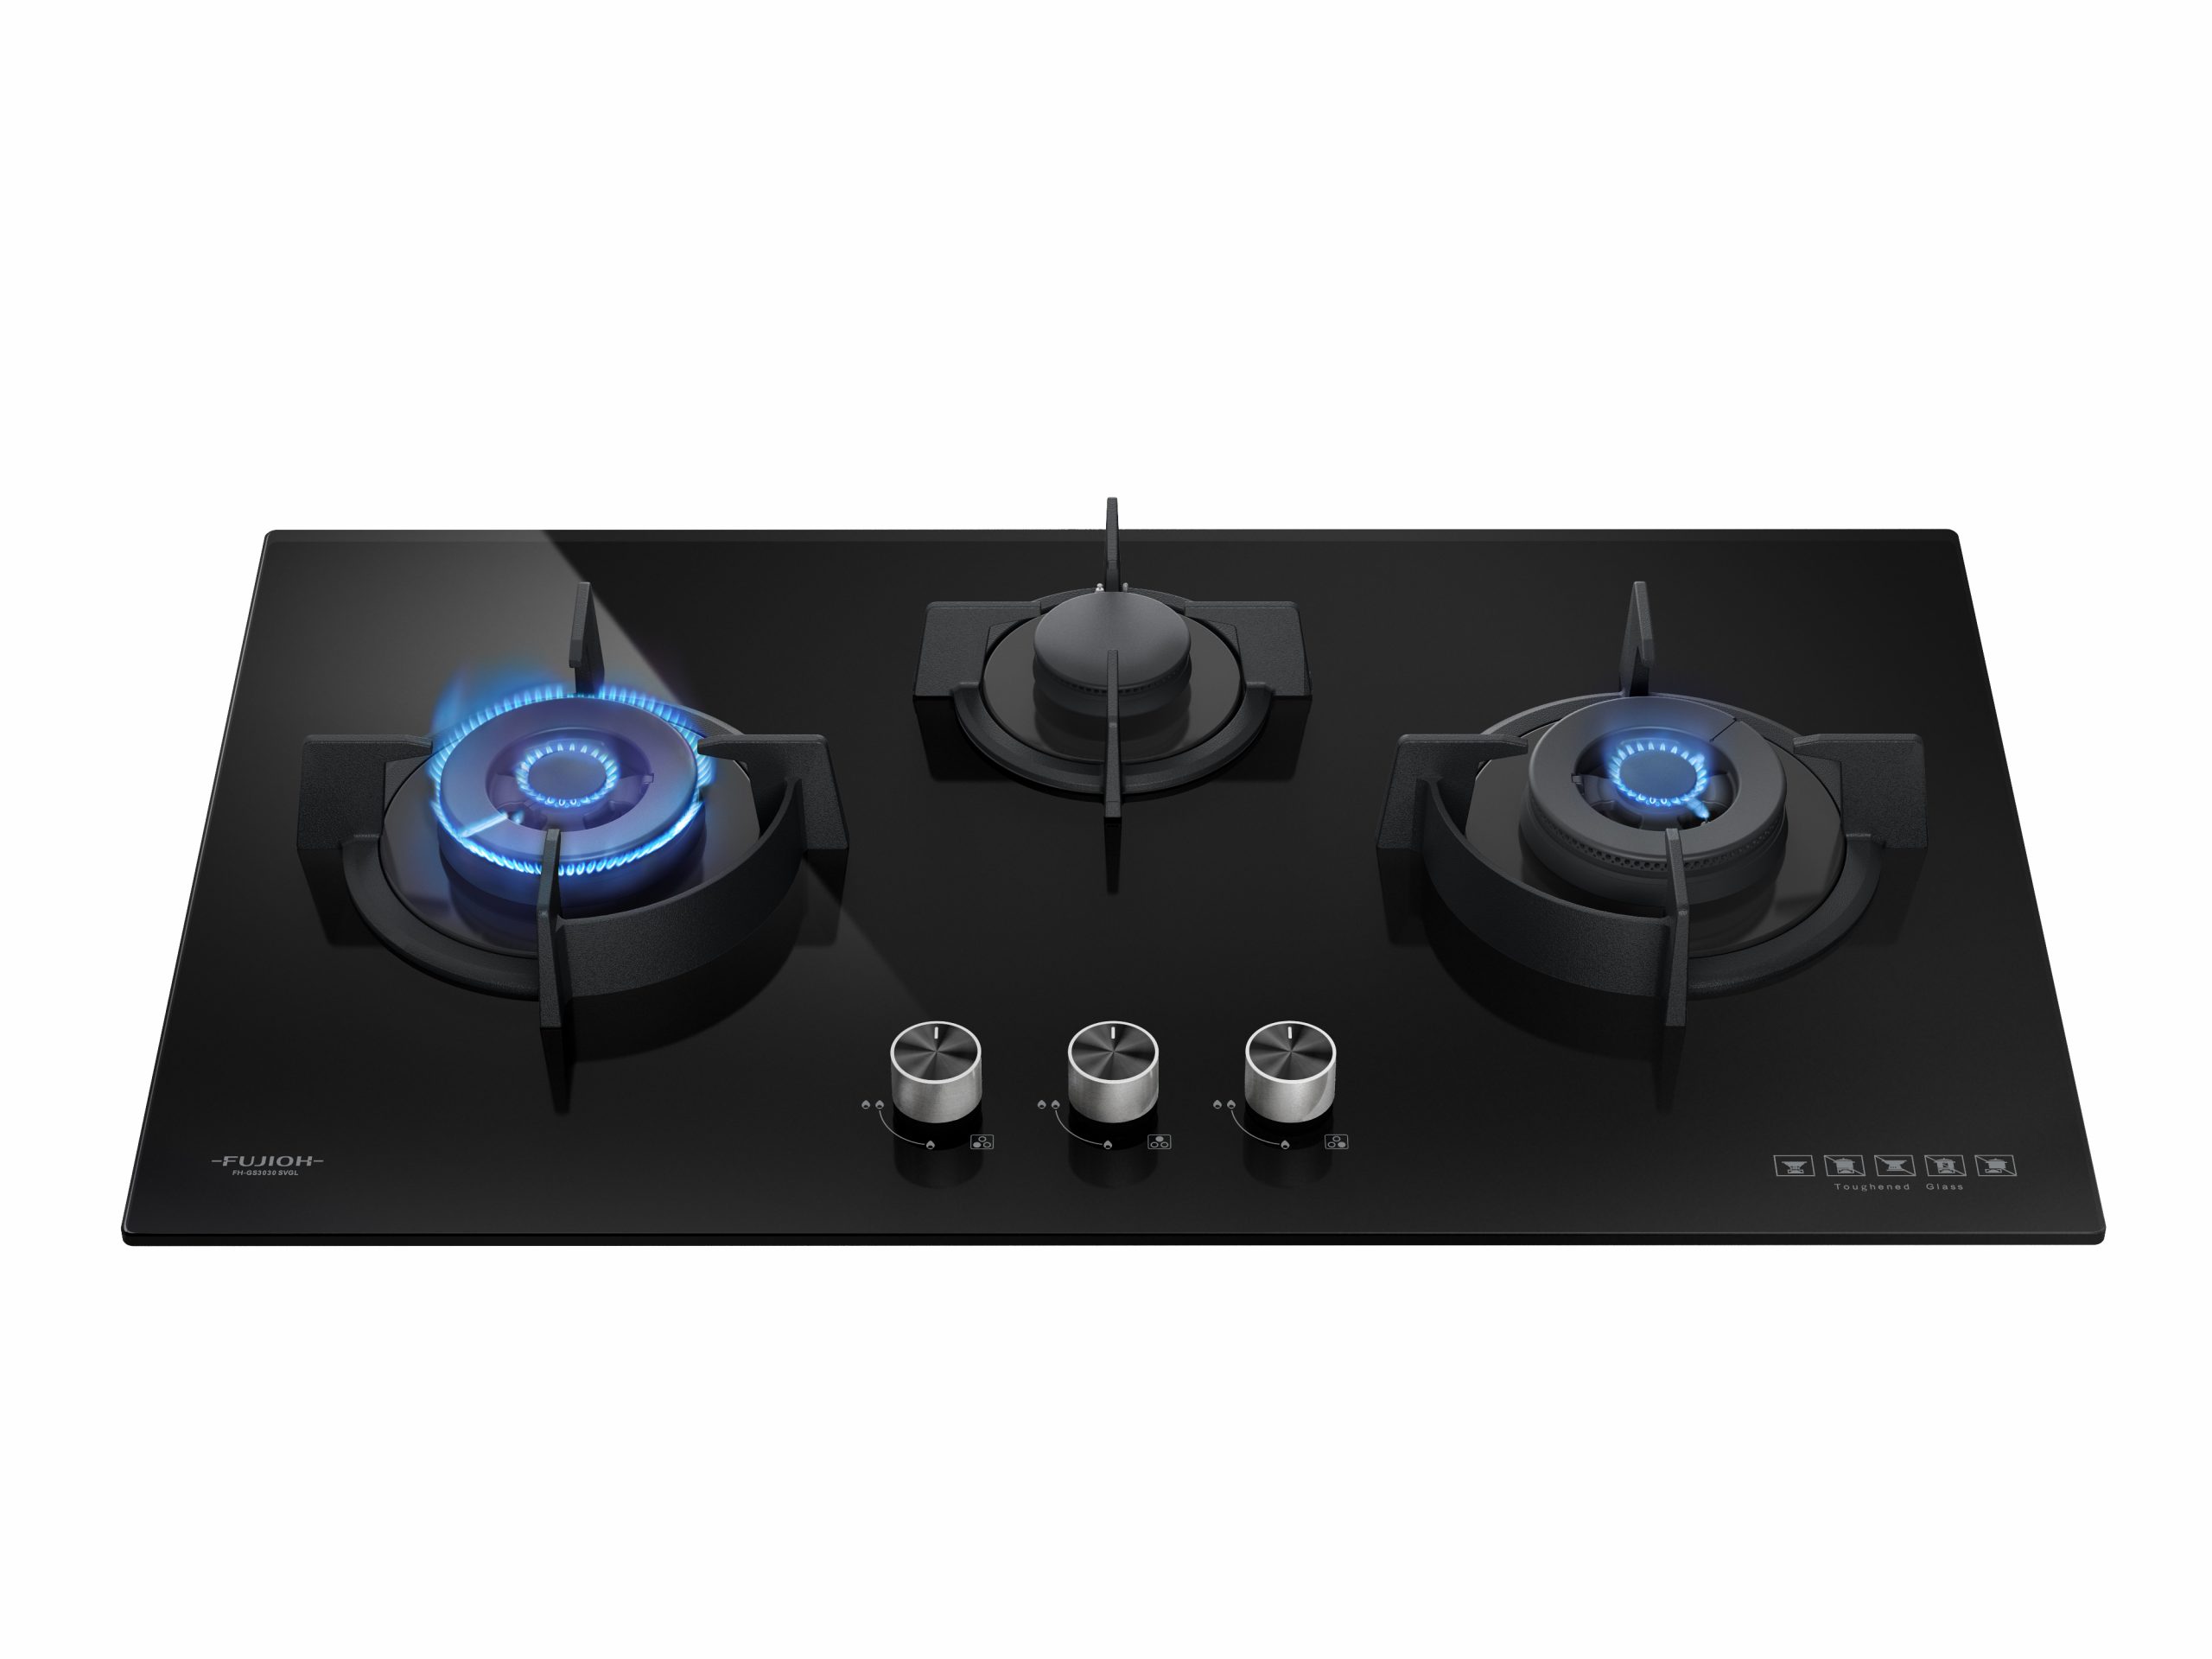 FUJIOH Gas Hob FH-GS3030 SVGL with Flame